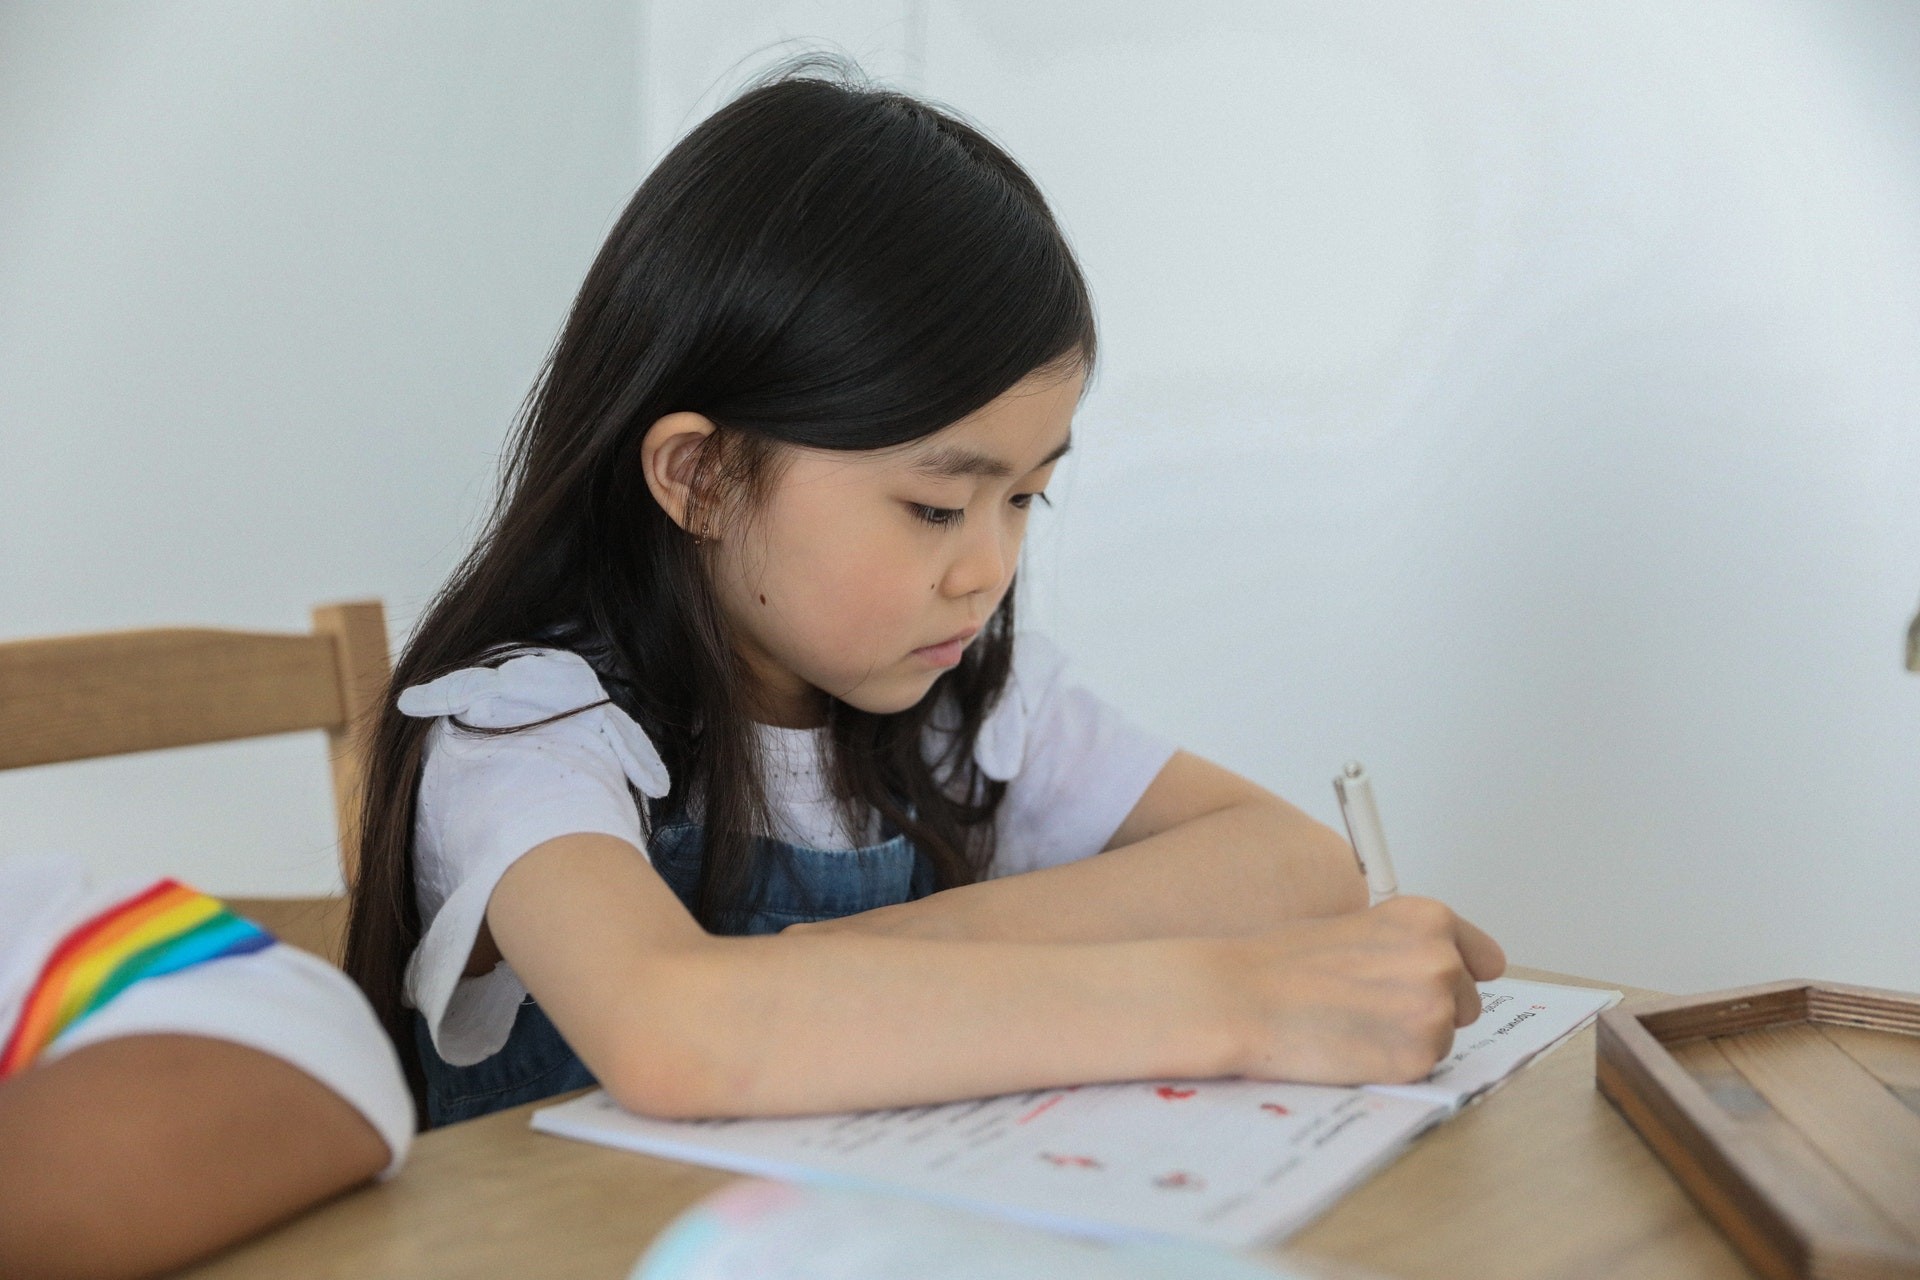 A young student works on her math homework in the classroom